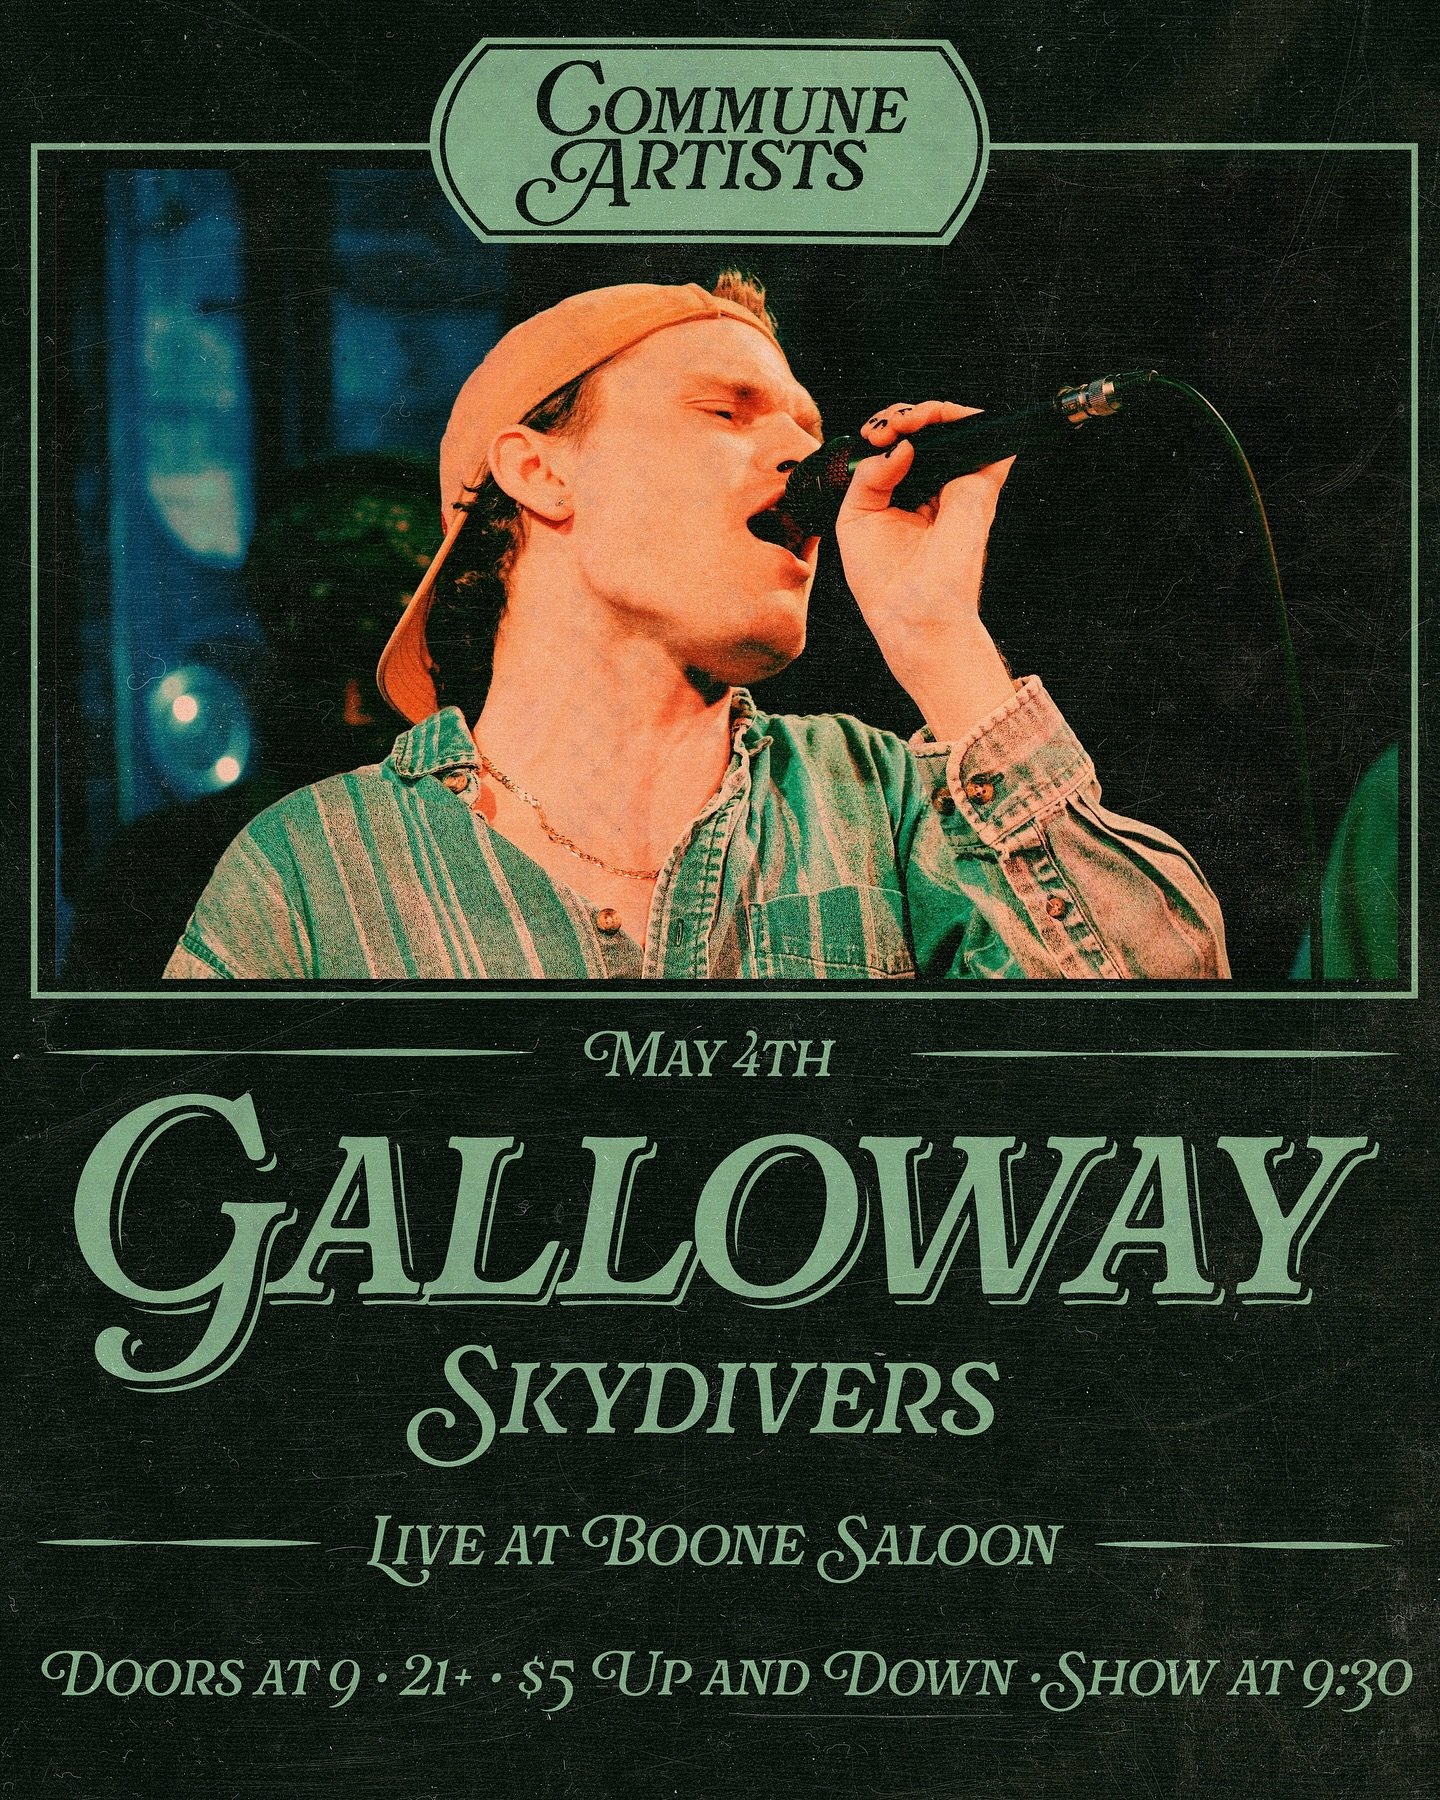 ‼️BOONE‼️
Come out this Saturday to @boonesaloon to see @galloway_nc and.@skydivers.band !